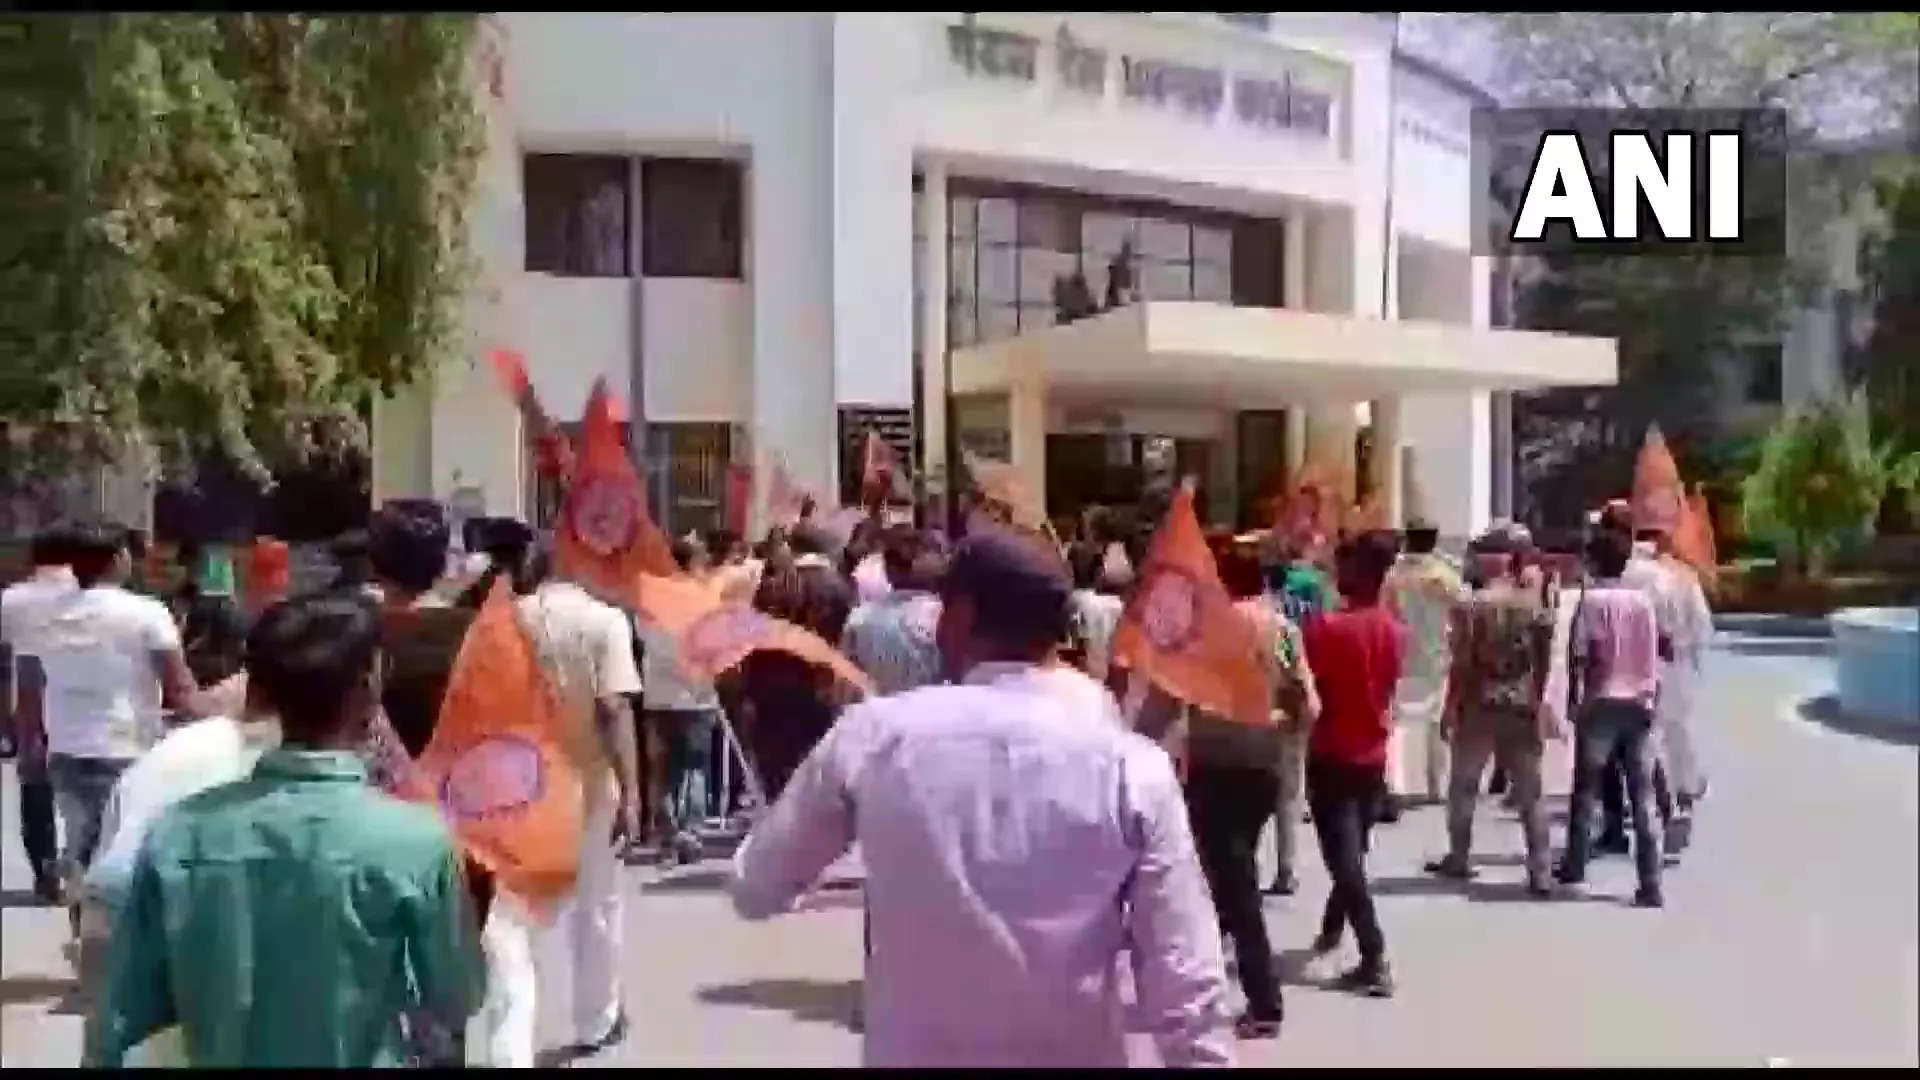 Hindu groups protest outside Divisional Railway Manager's office in Agra